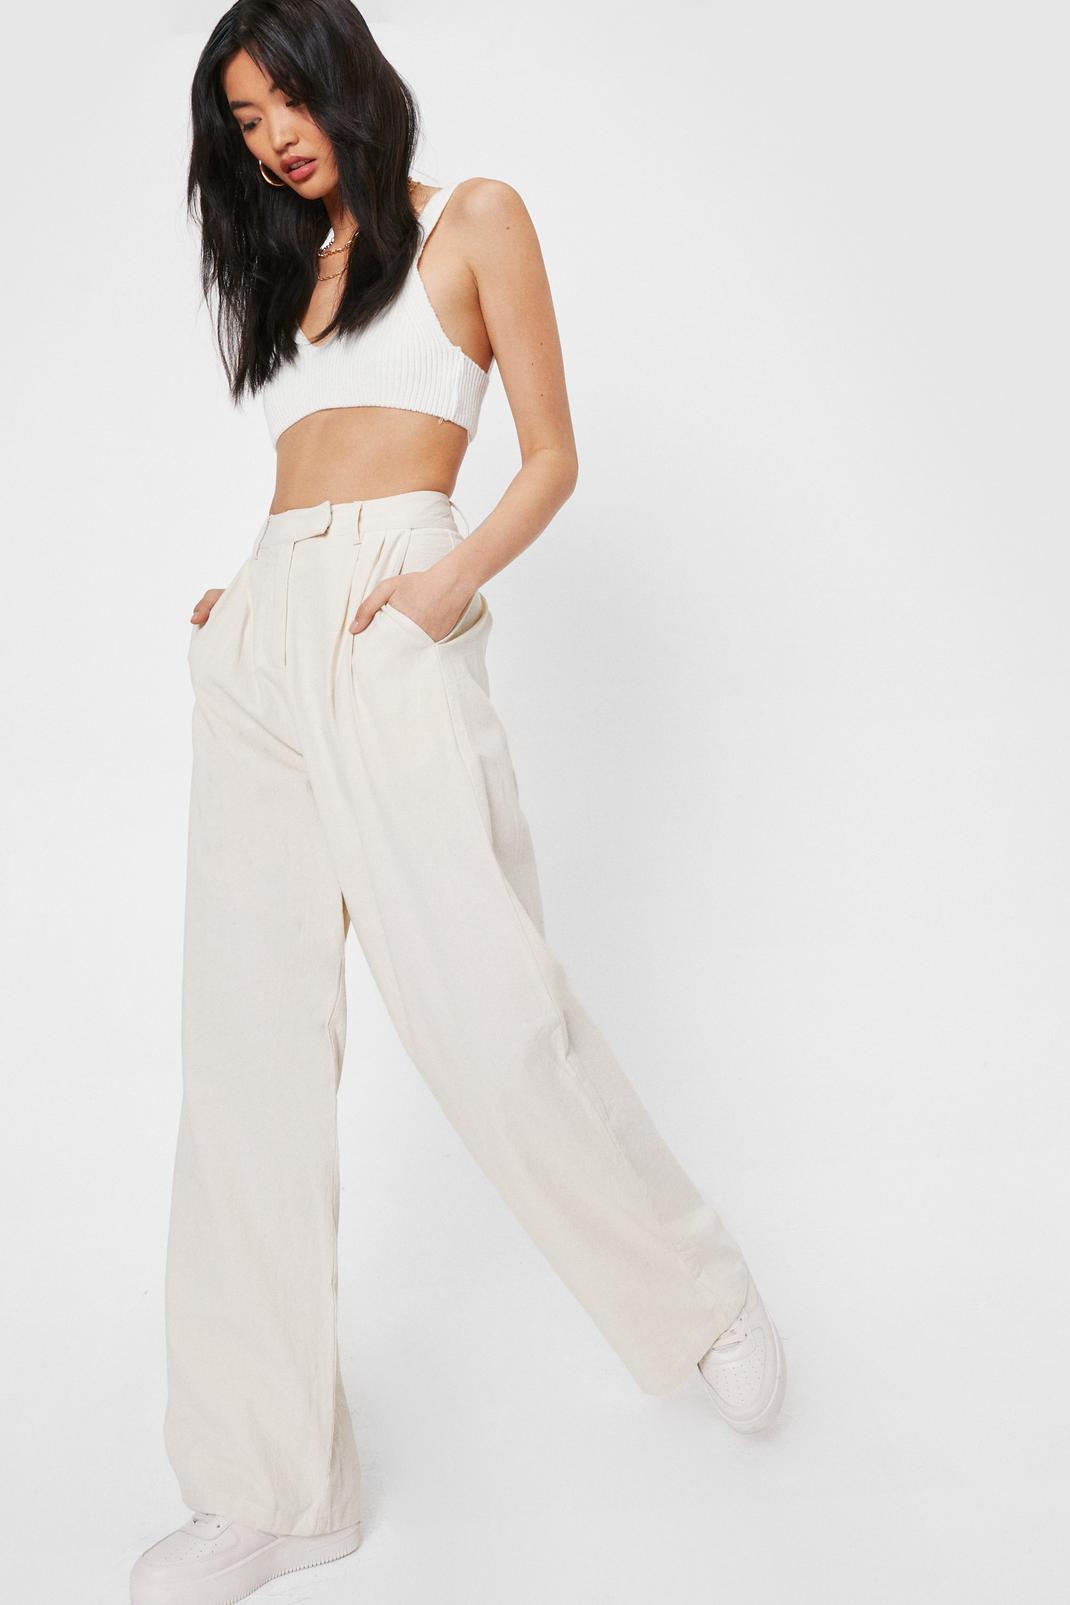 High Waisted Sequins Flare Pants – NLTHELABEL